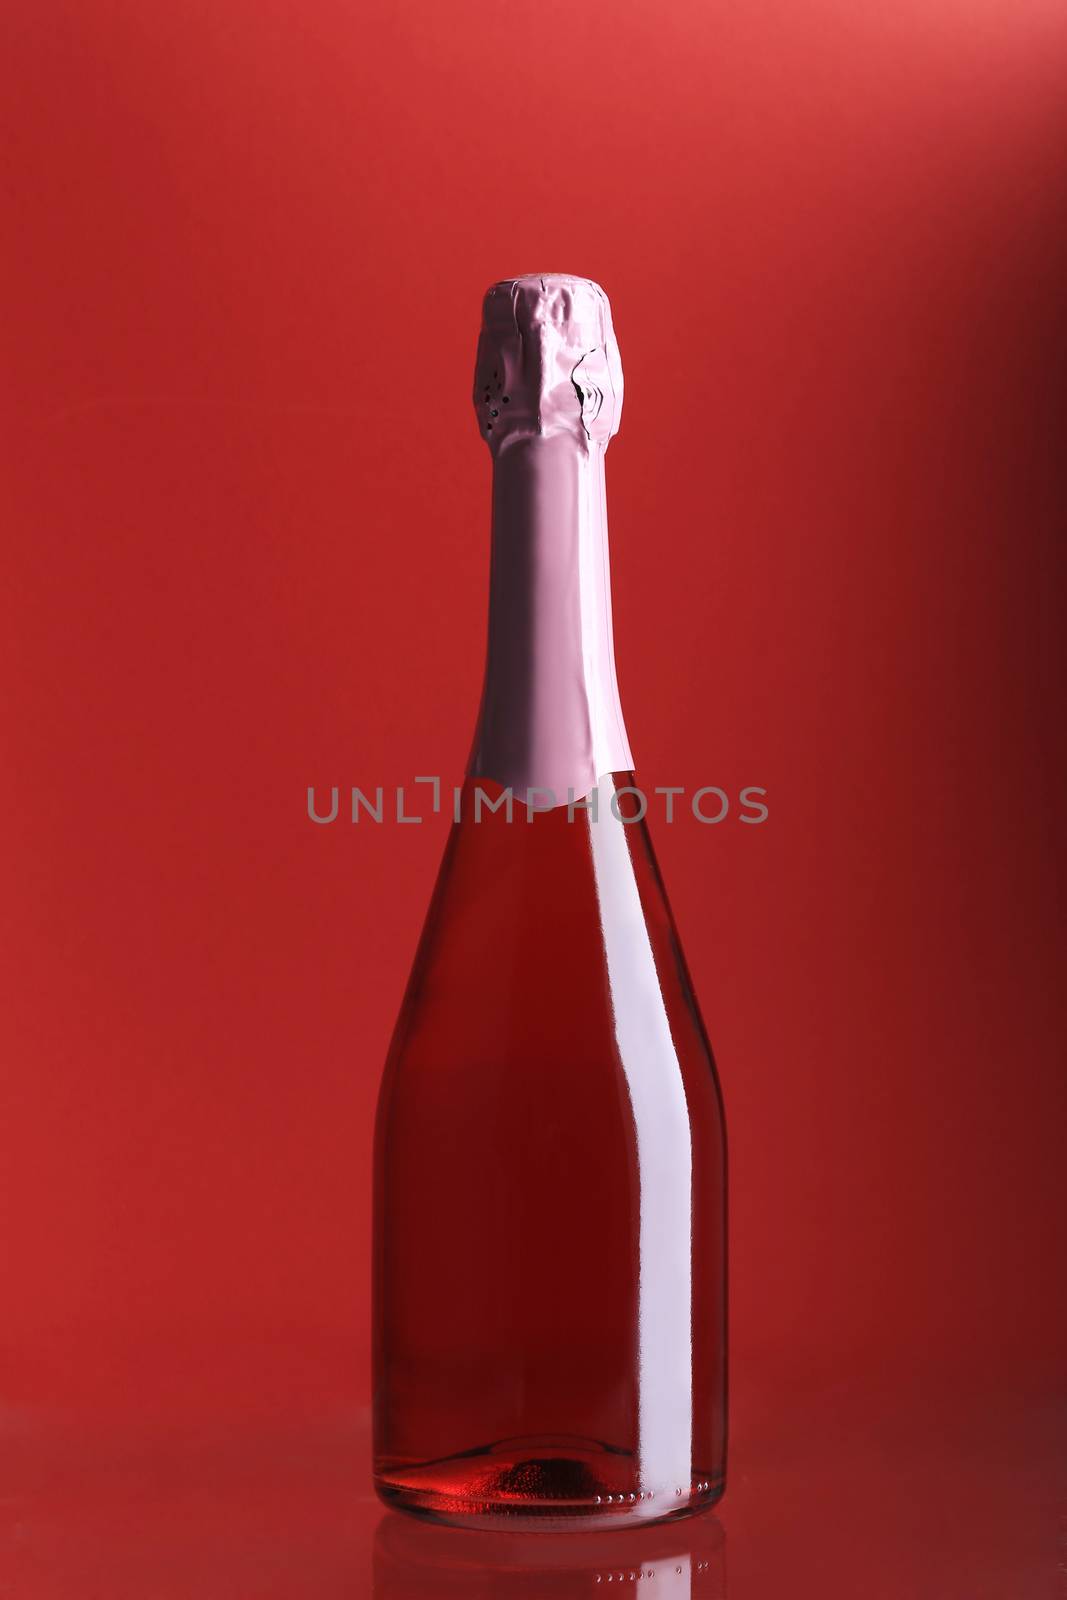 Bottle of pink champagne. Whole pink background.